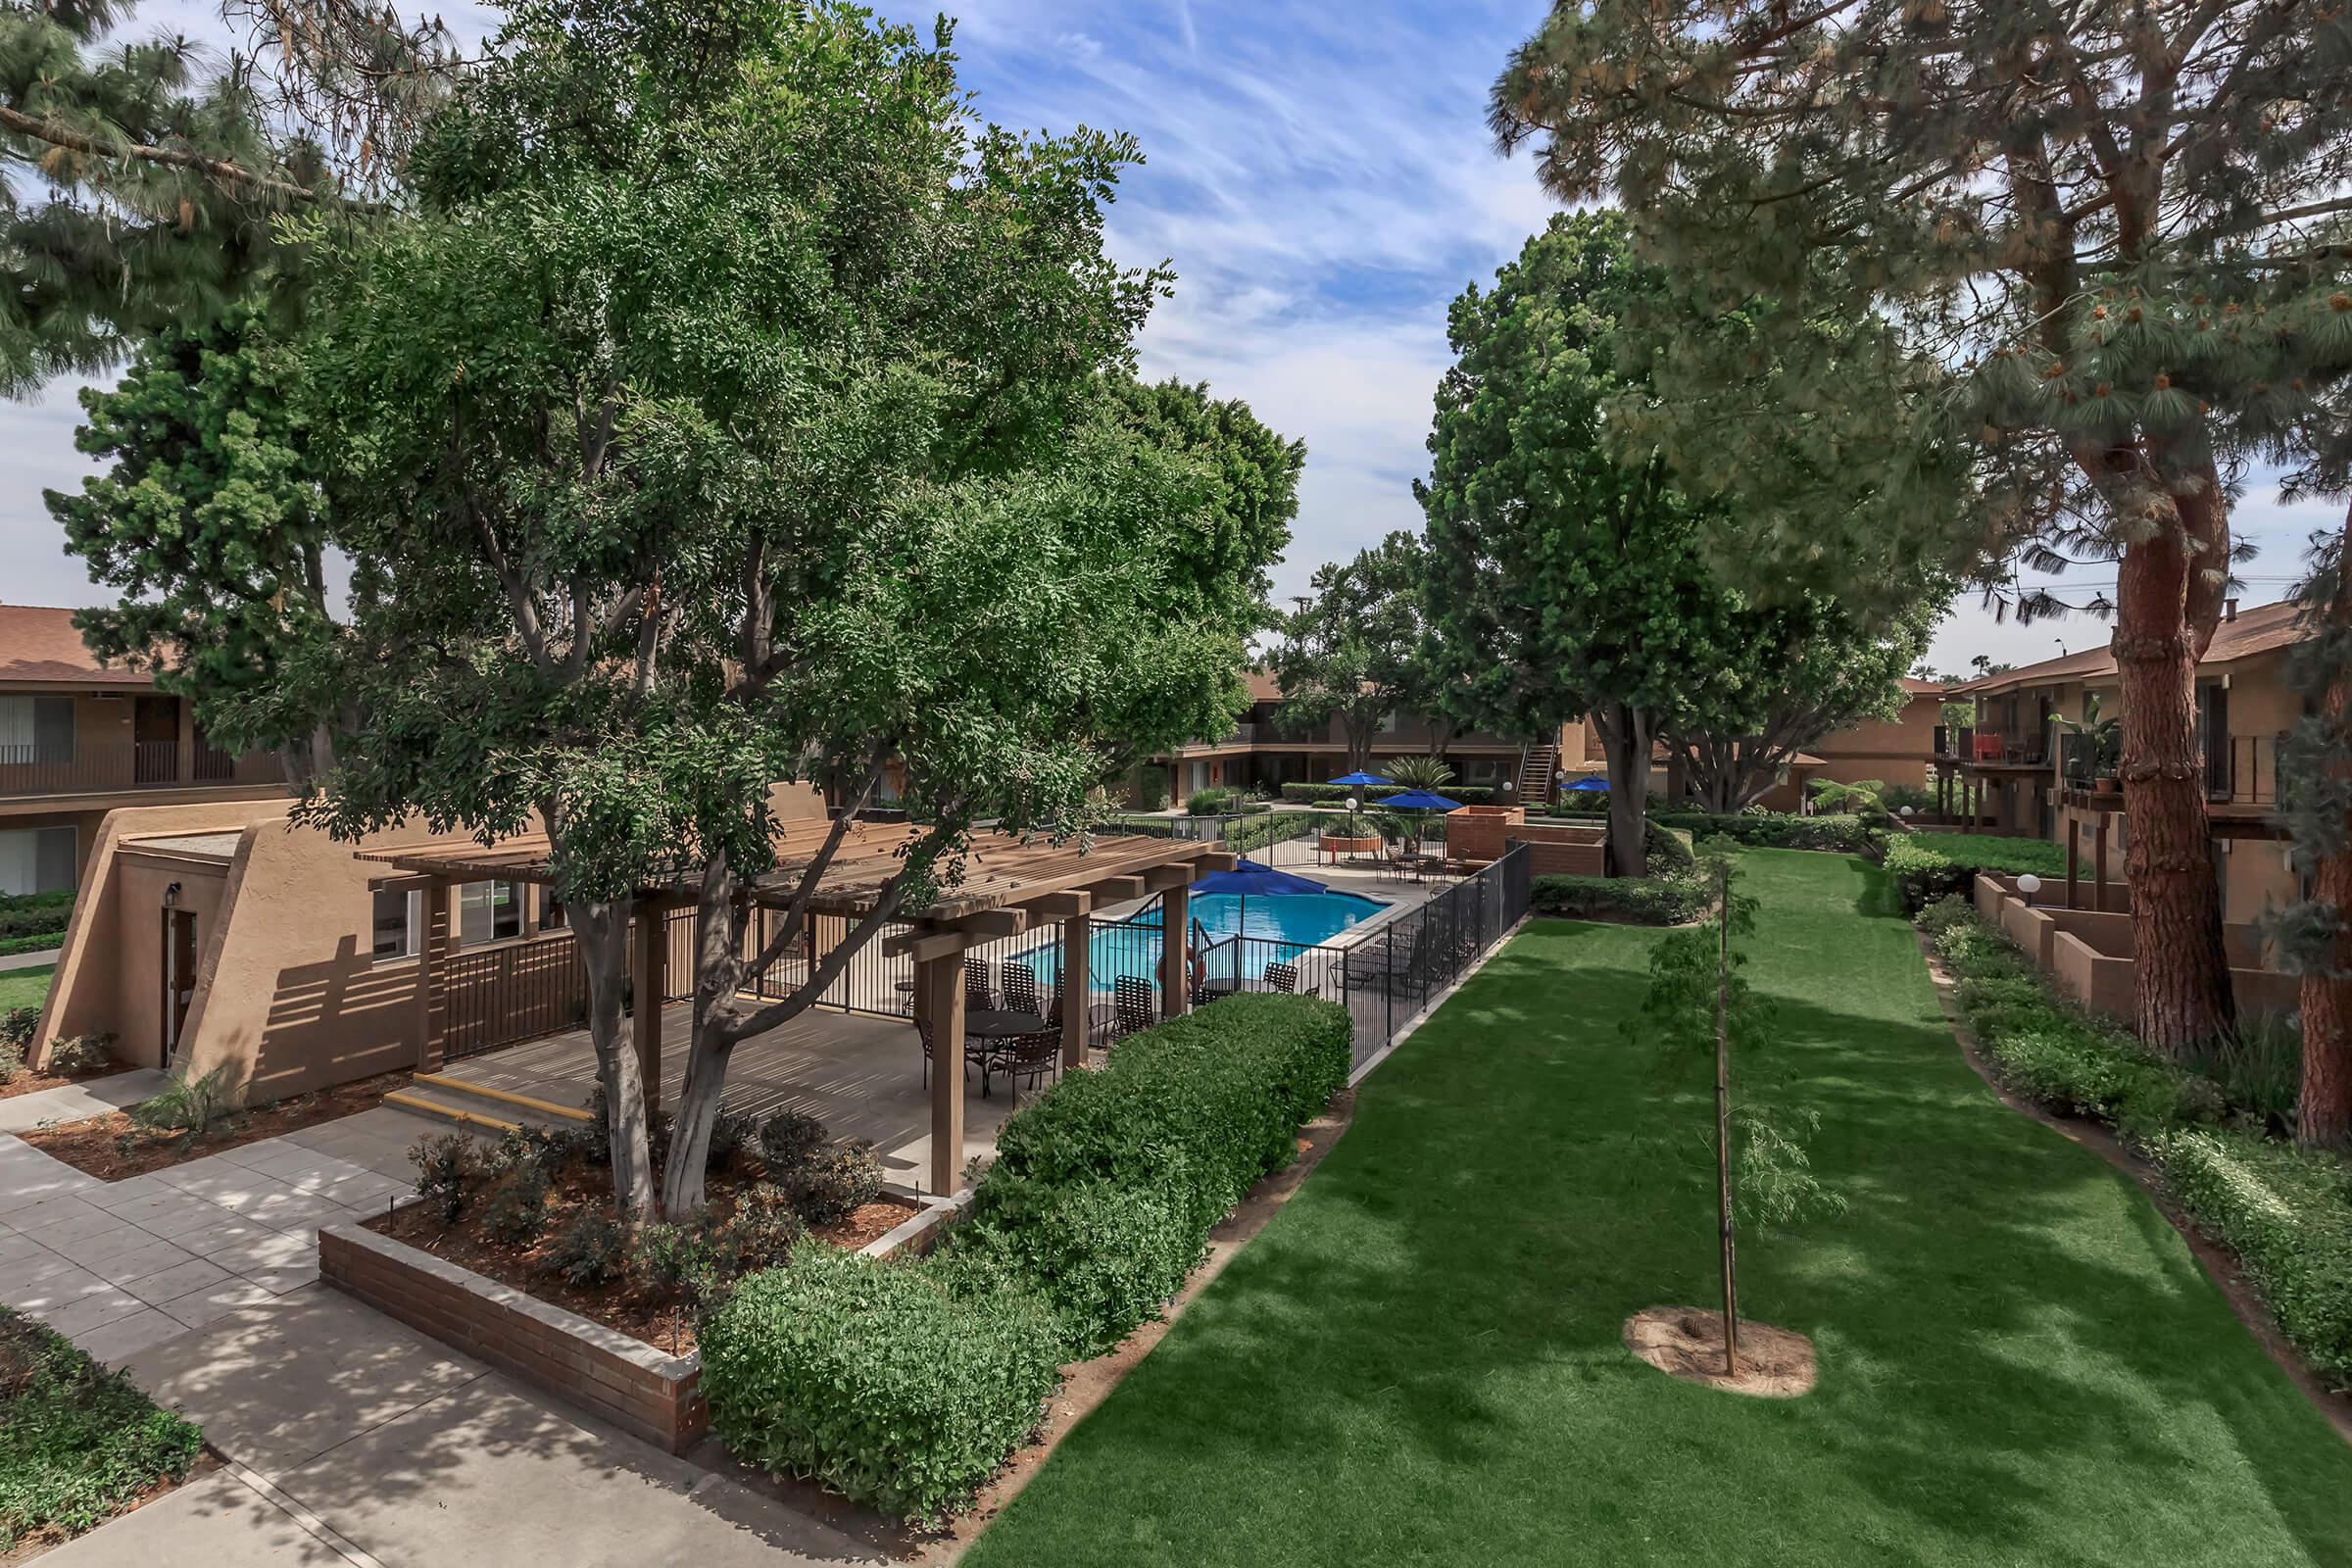 La Ramada Apartment Homes community pool with green landscaping